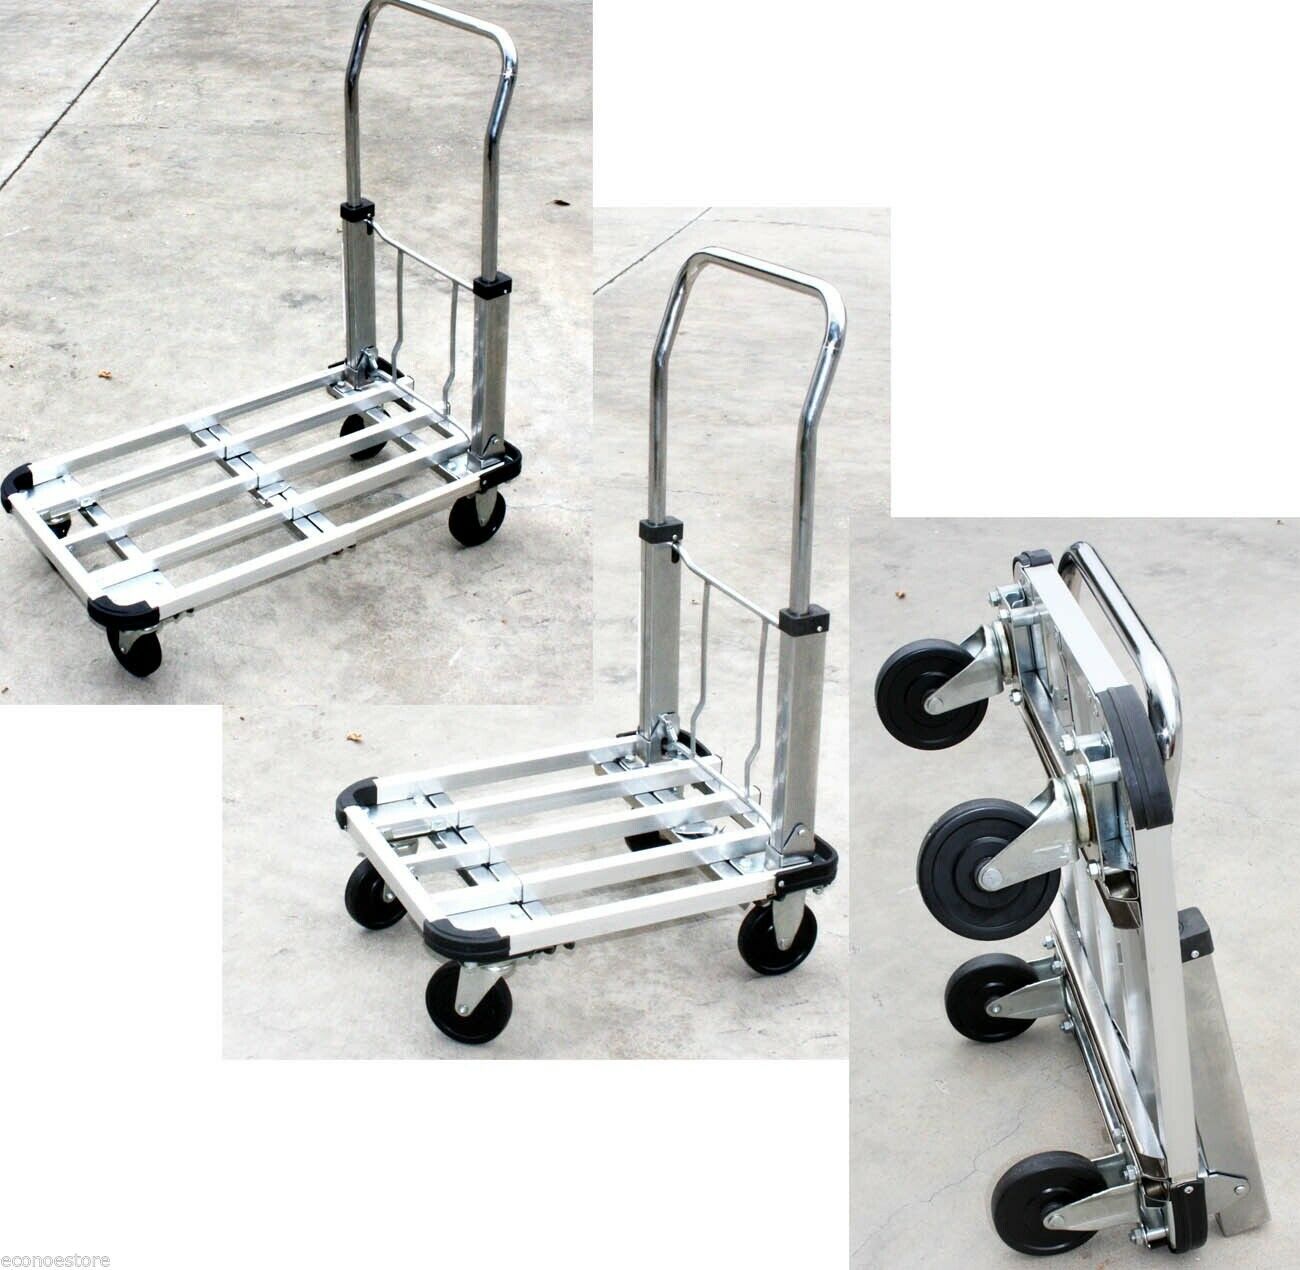 220 LBS ALUMINUM PLATFORM MOVING STURDY EXTENDABLE COMPACT HAND CART TRUCK DOLLY 